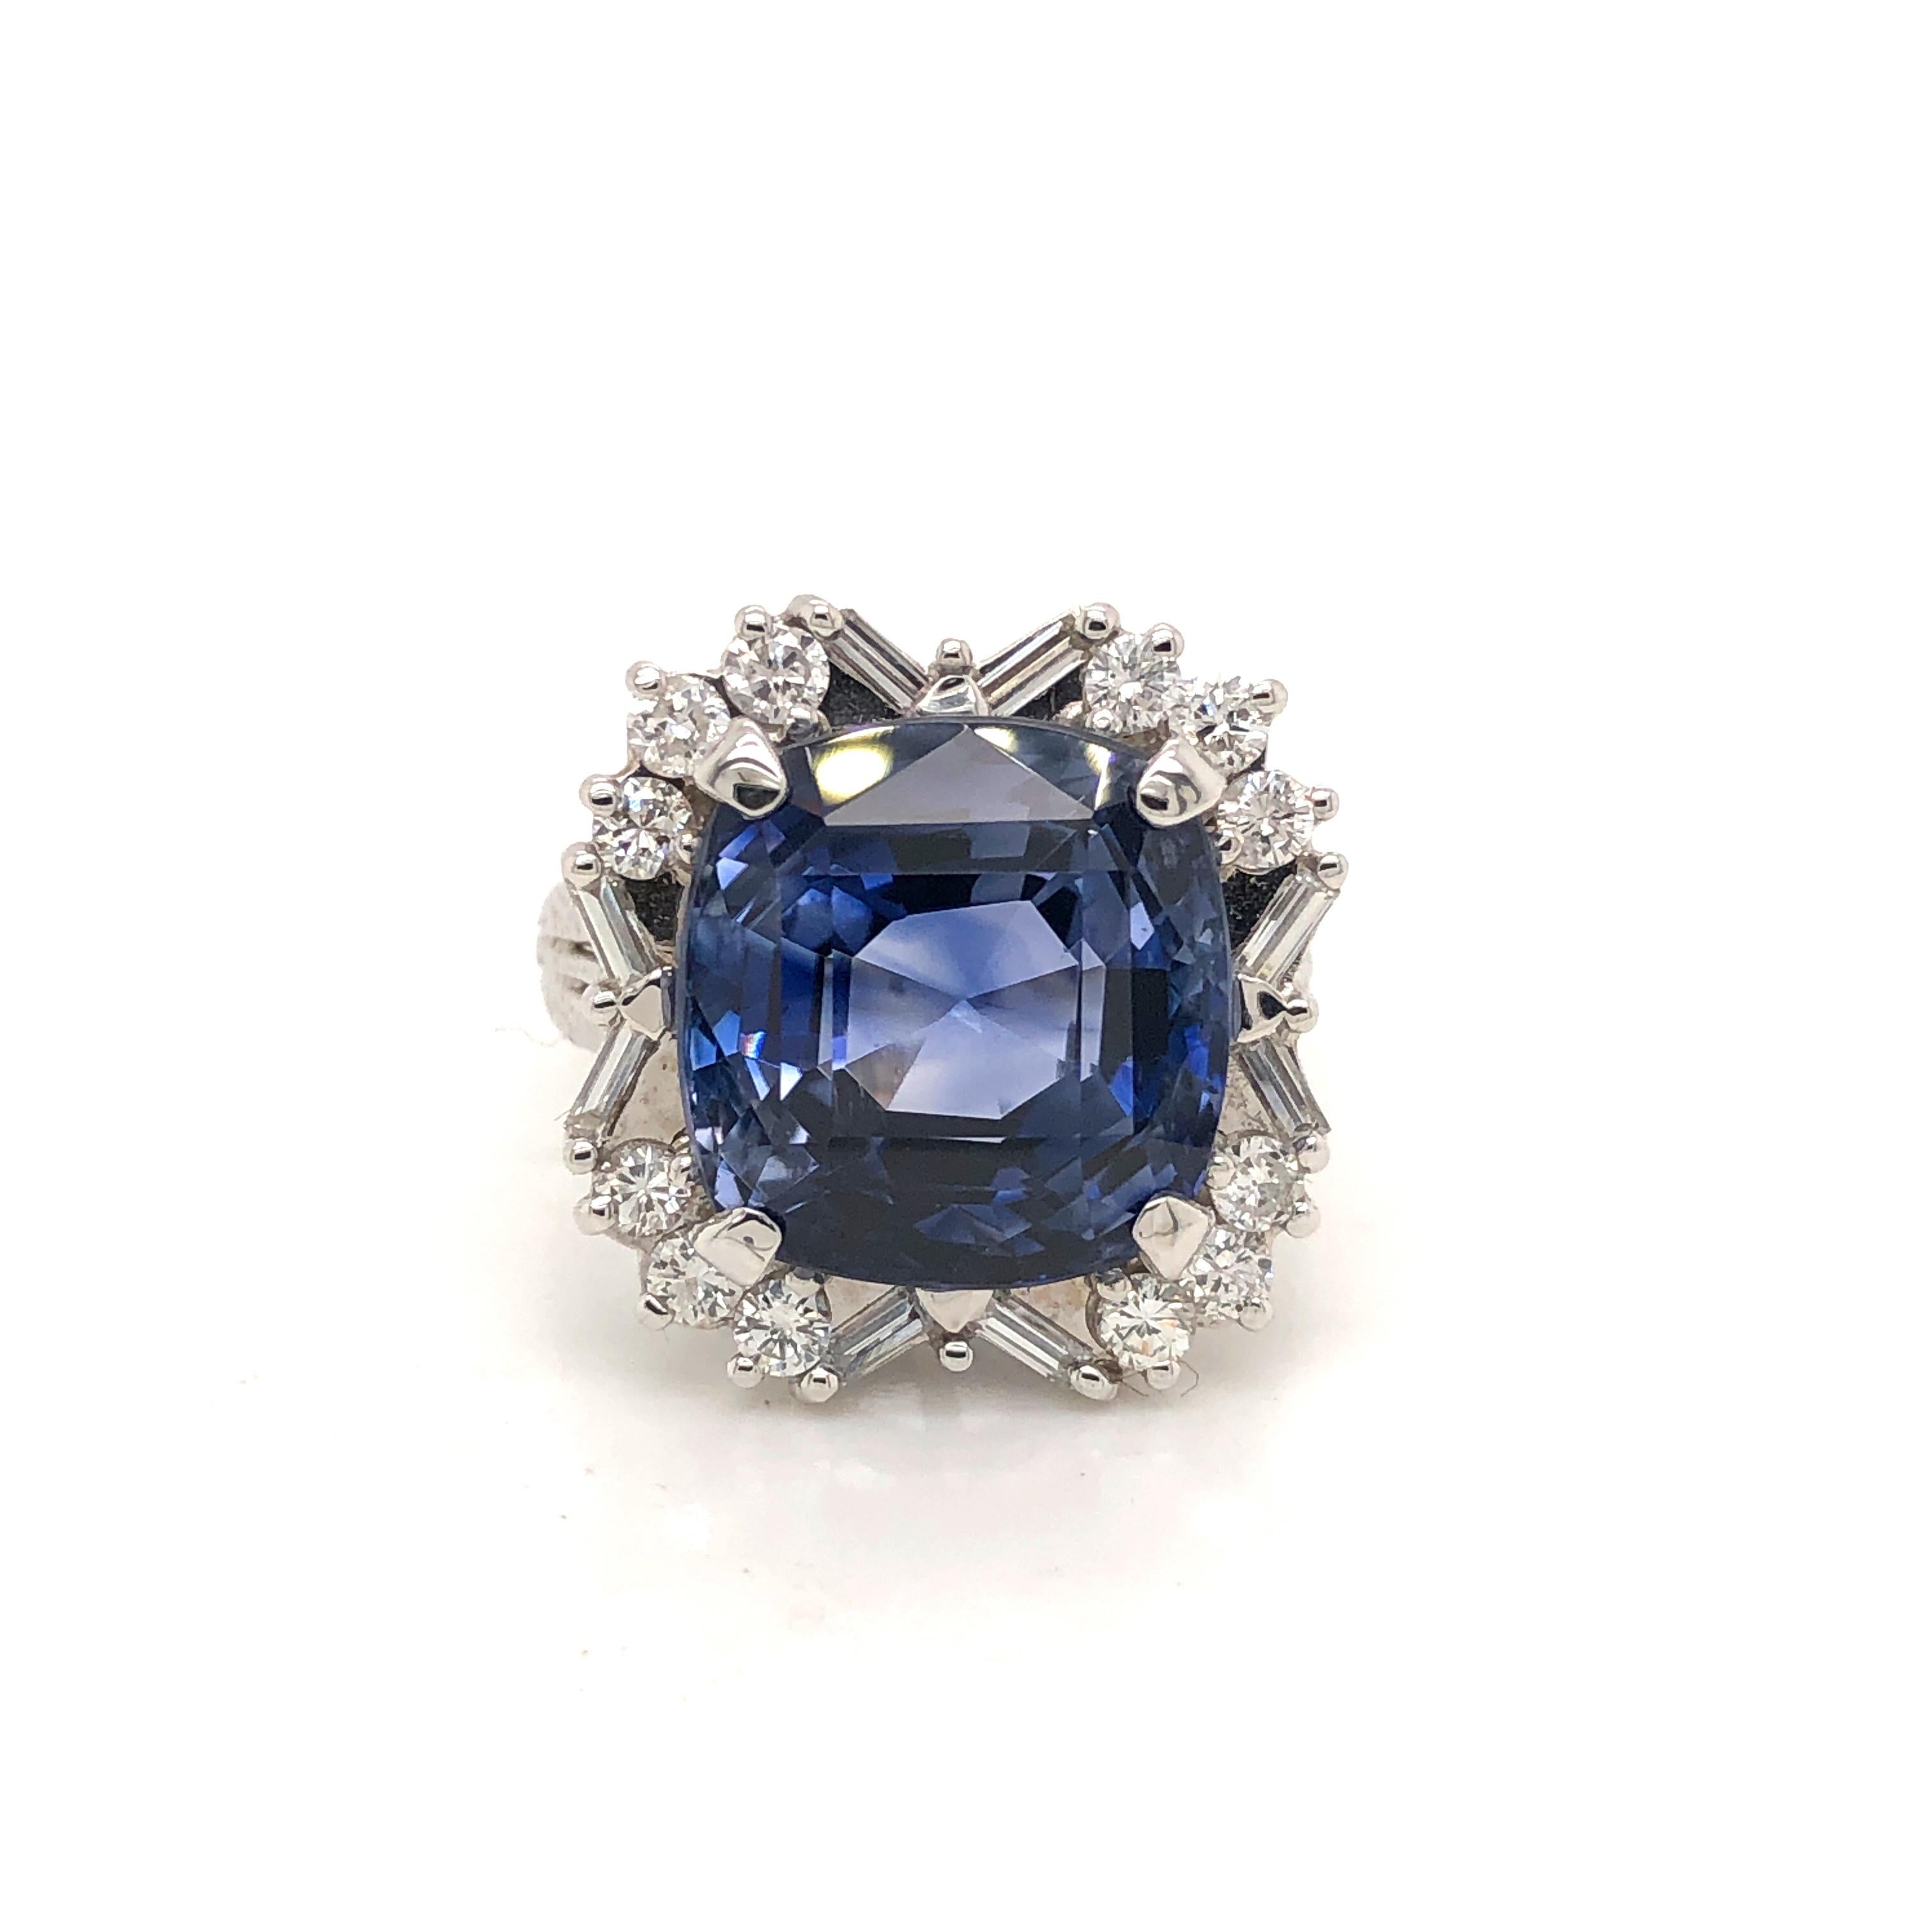 Estate Sapphire and Diamond ring. Focal point of this piece is a gorgeous Ceylon Sapphire cushion cut with a vibrant blue color. The stone weighs 16.44 Ct. and measures 13.51 x 13.03 x 9.26 mm. This natural corundum gemstone comes with paperwork